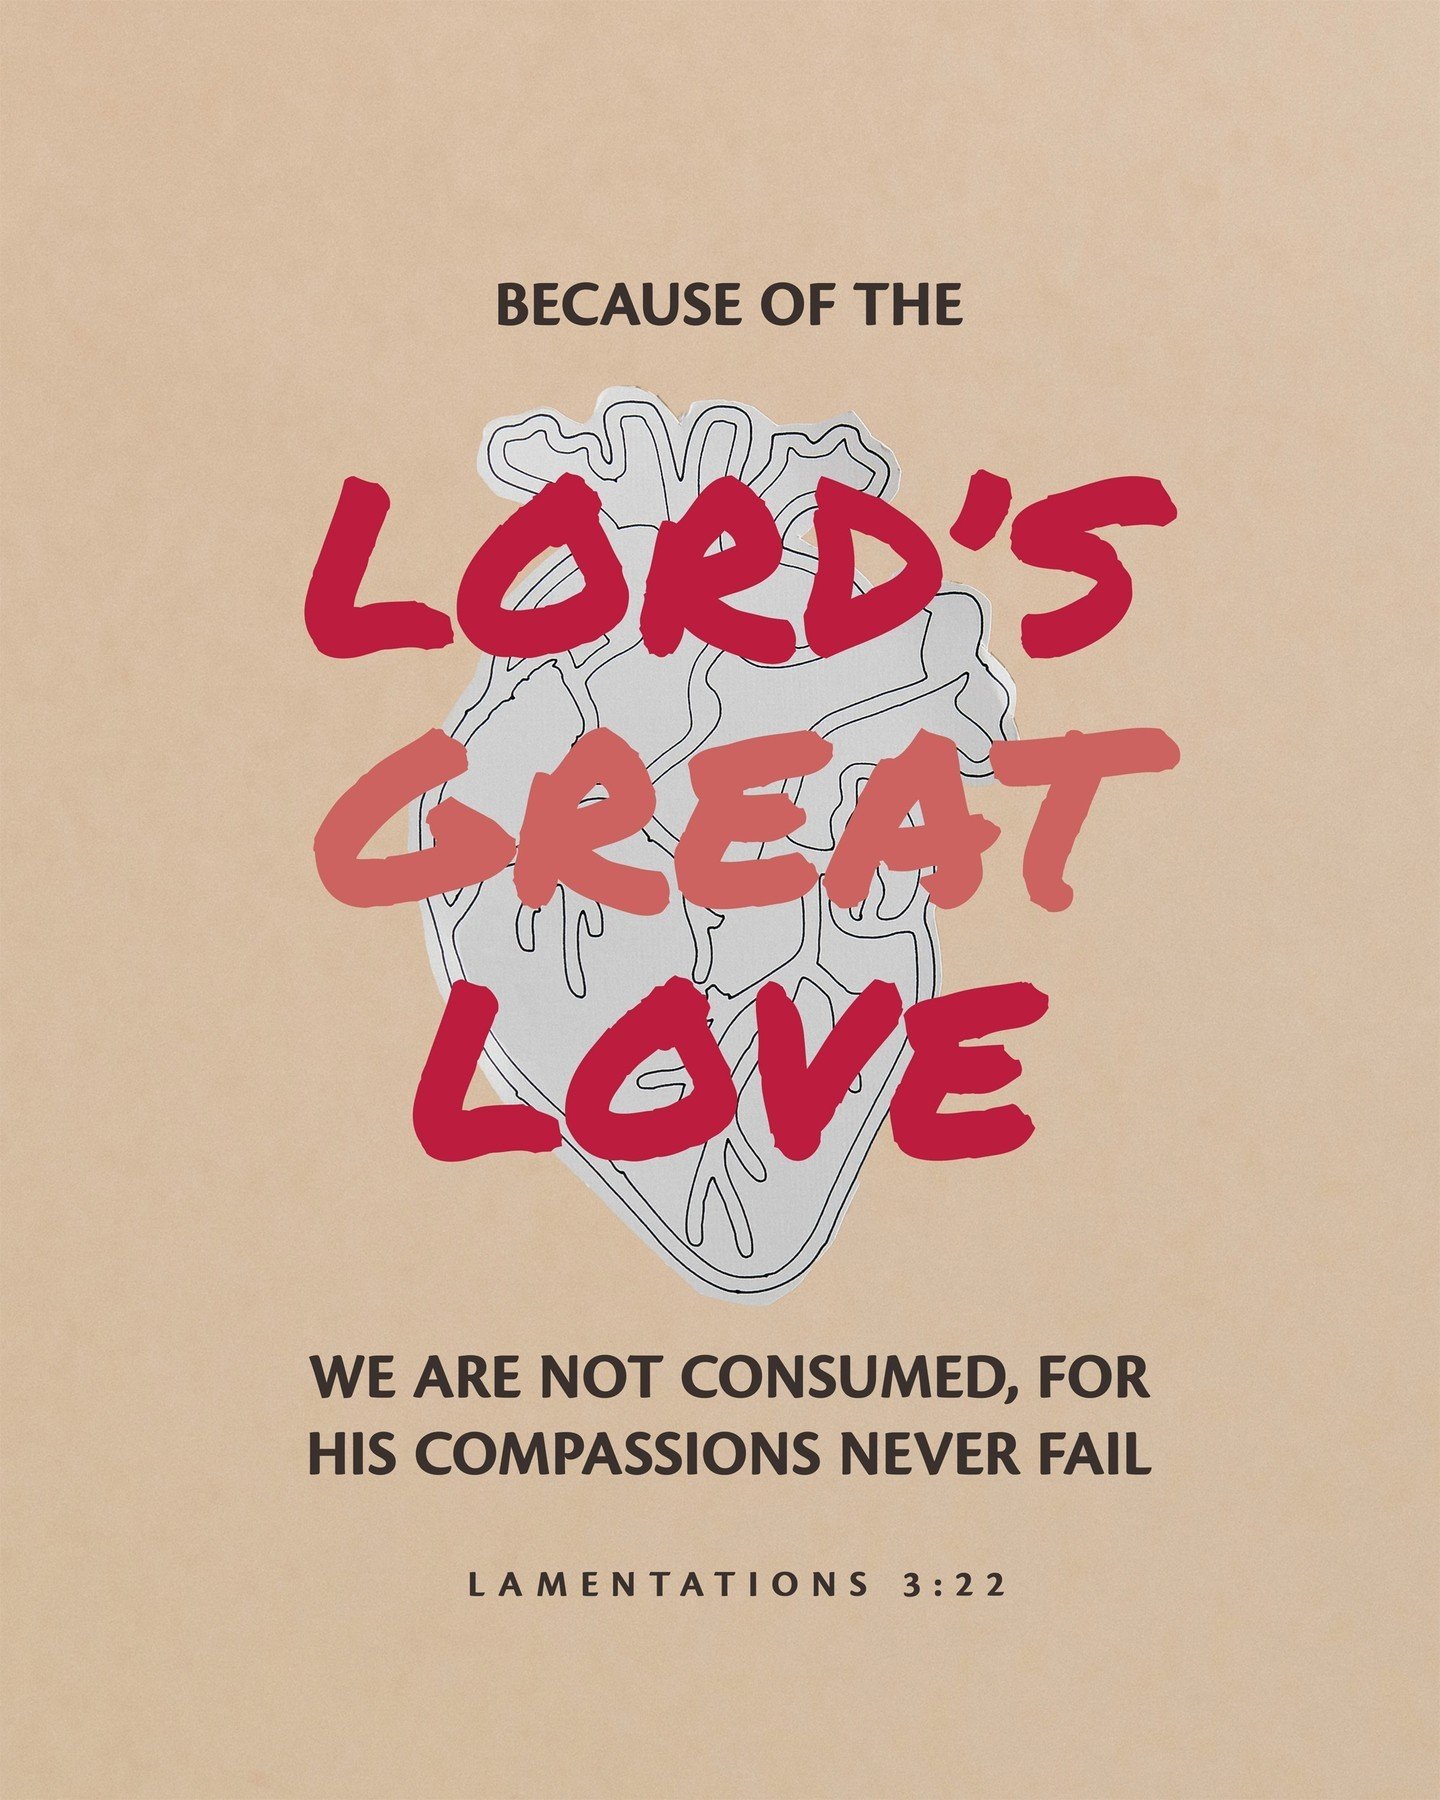 &quot;Because of the Lord's great love we are not consumed, for his compassions never fail.&quot; - Lamentations 3:22
.
.
.
#church #god #morning #jesus #christ #love #christian #worship #bible #lamentations